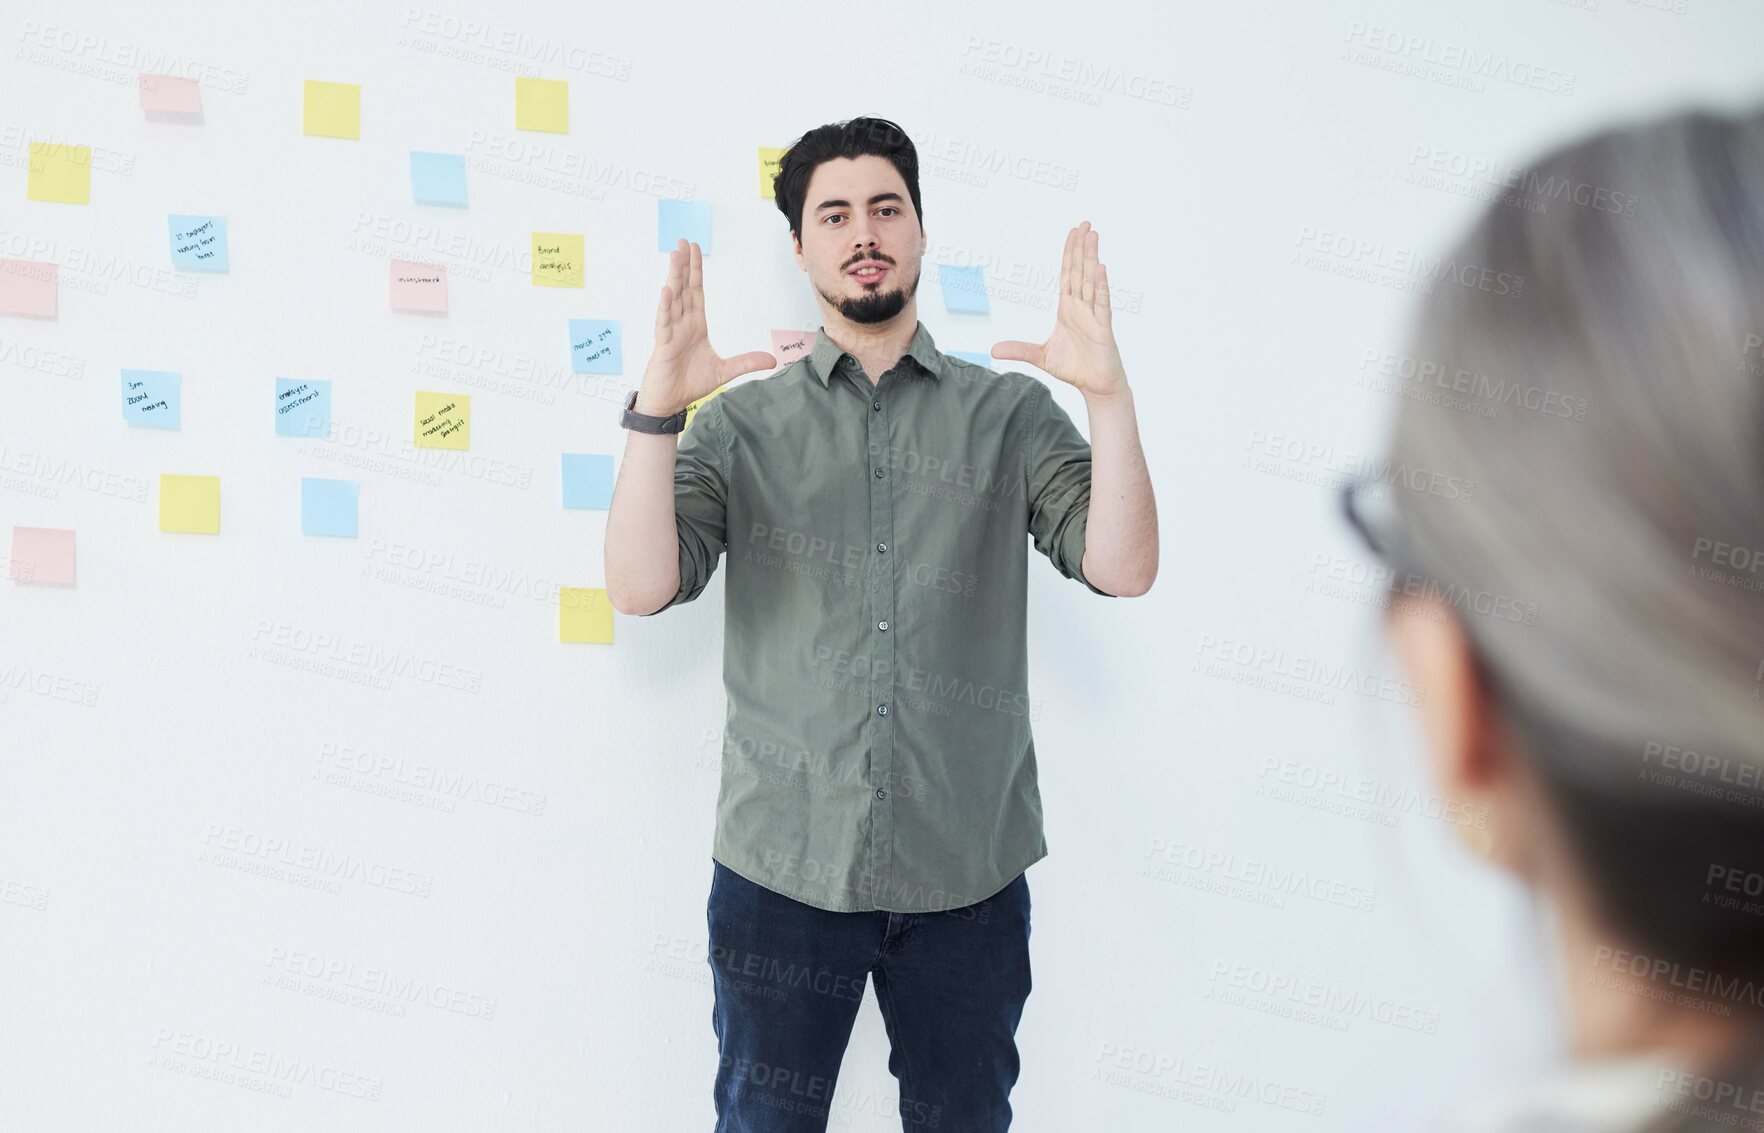 Buy stock photo Shot of a young businessman giving a presentation while standing against a wall with notes in an office